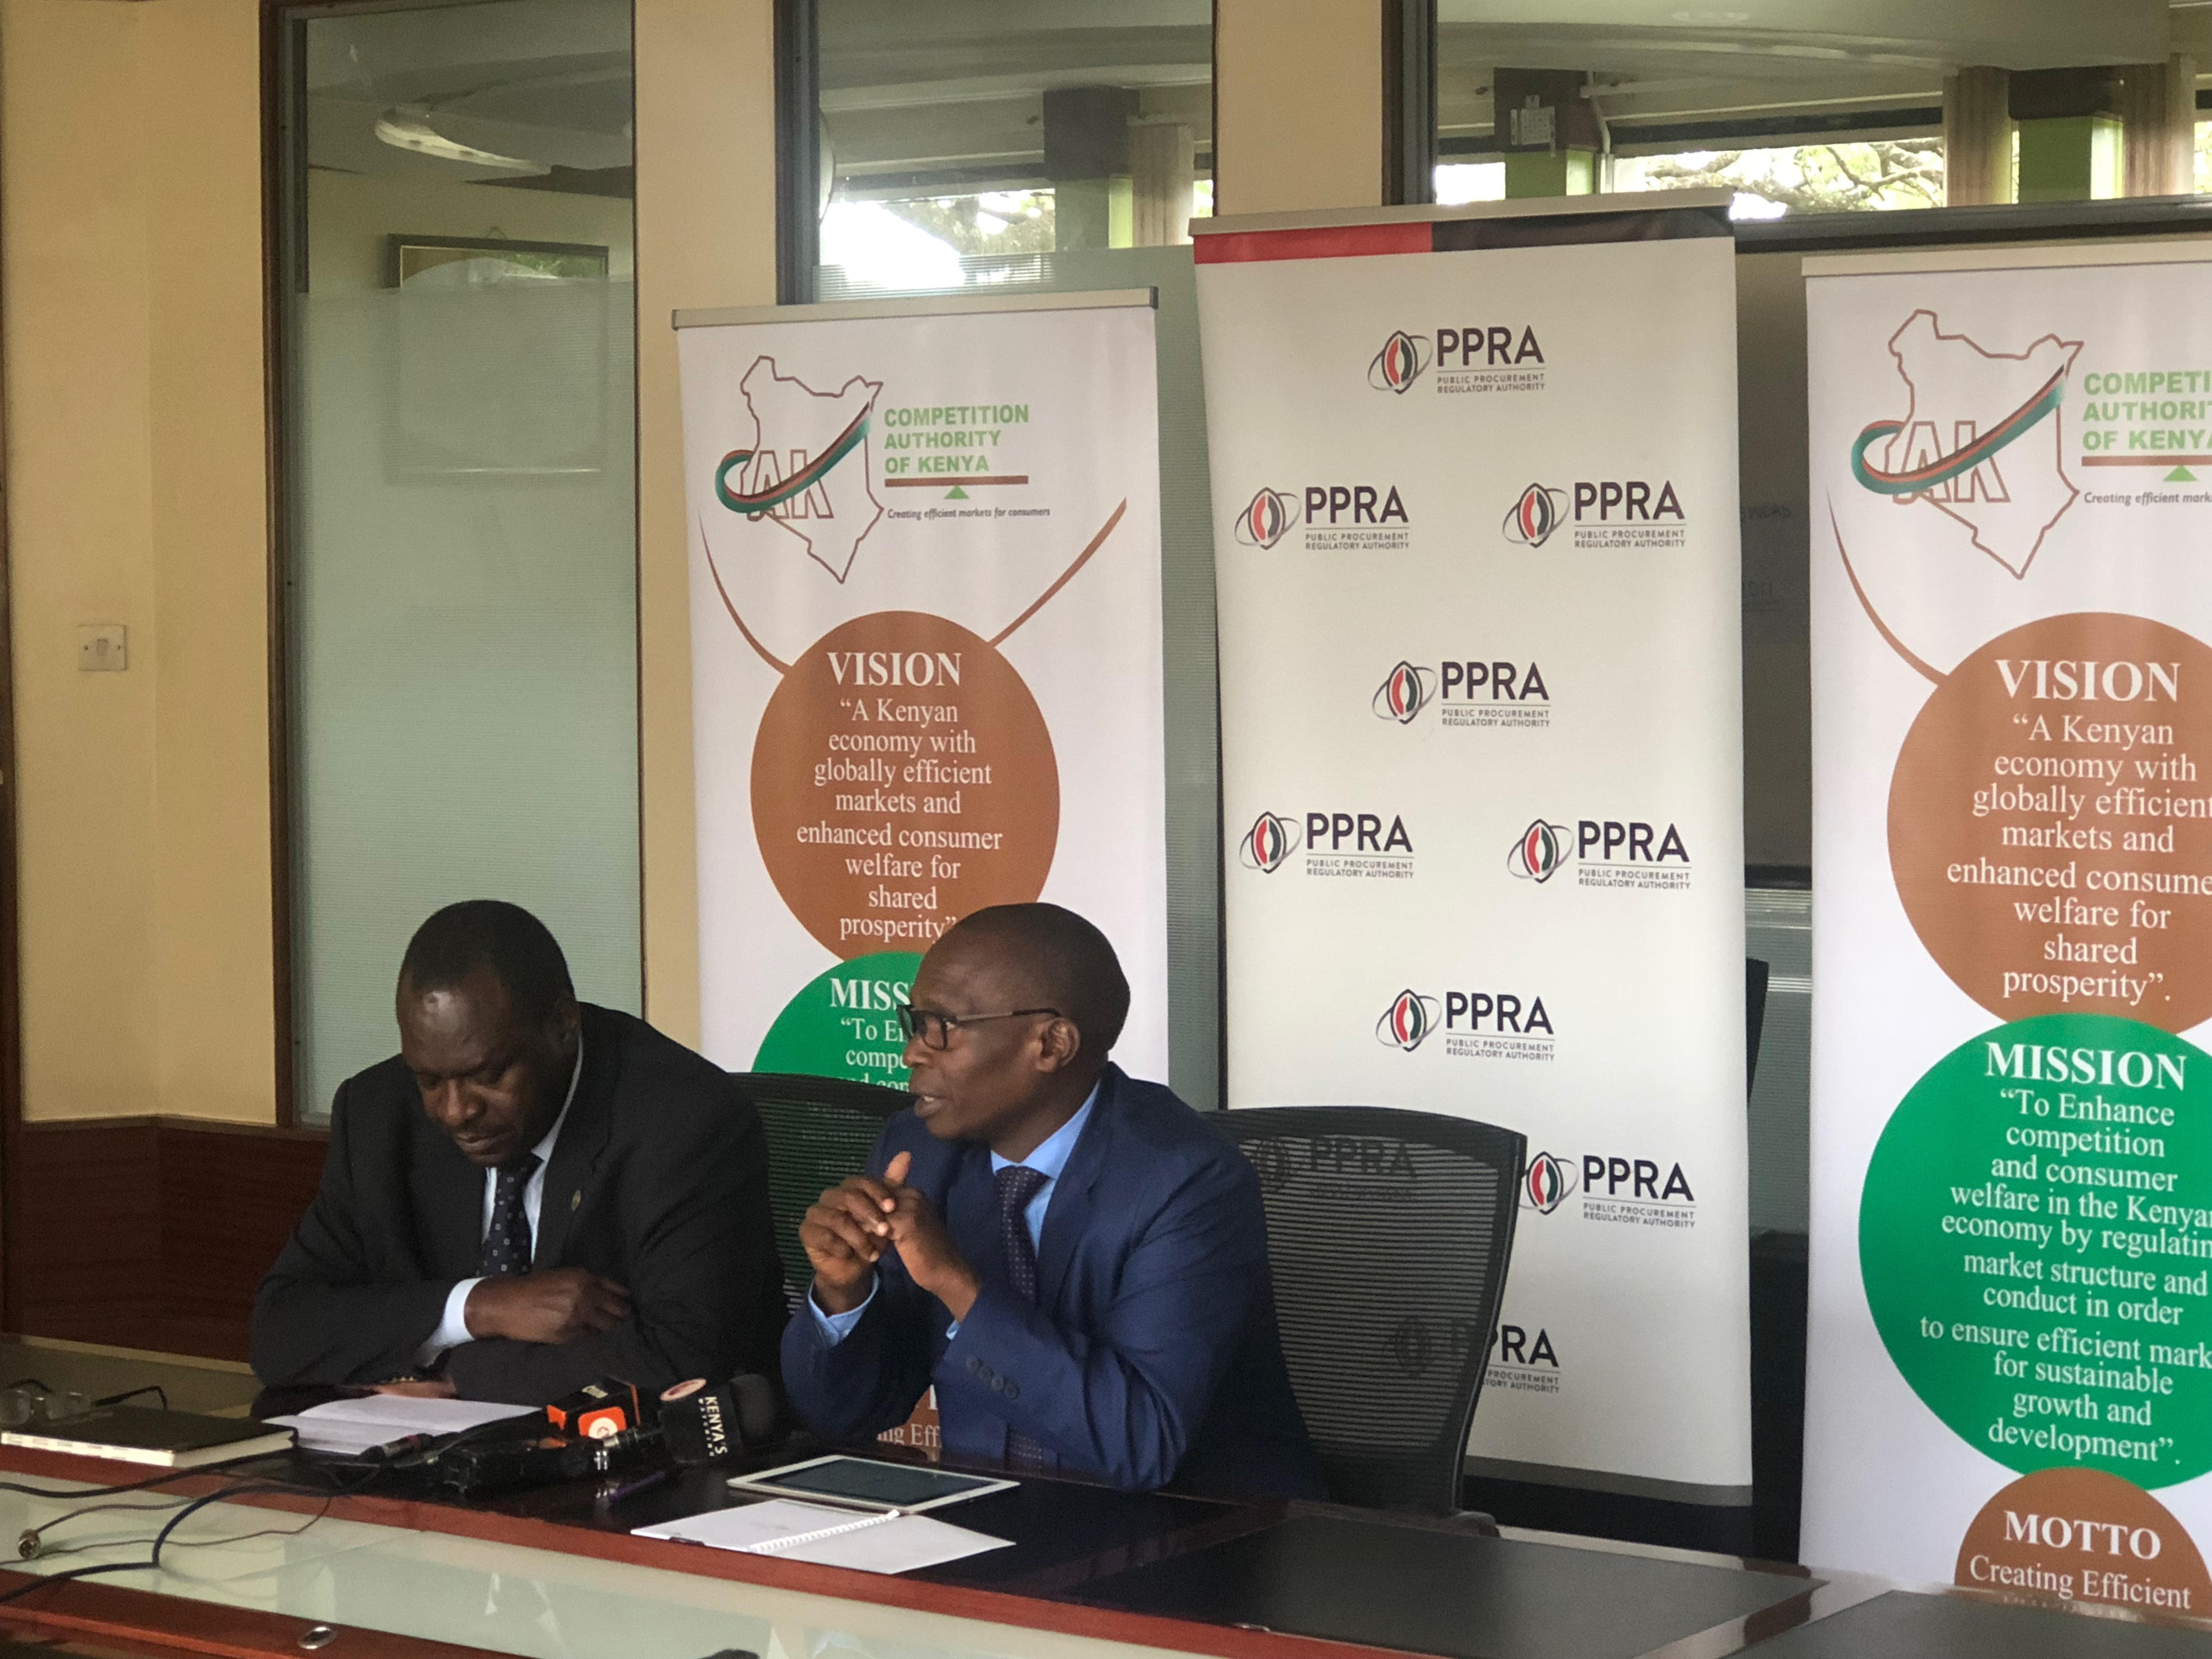 MoU signing between the Competition Authority of Kenya (CAK) and Public Procurement Regulatory Authority (PPRA) – June 2018